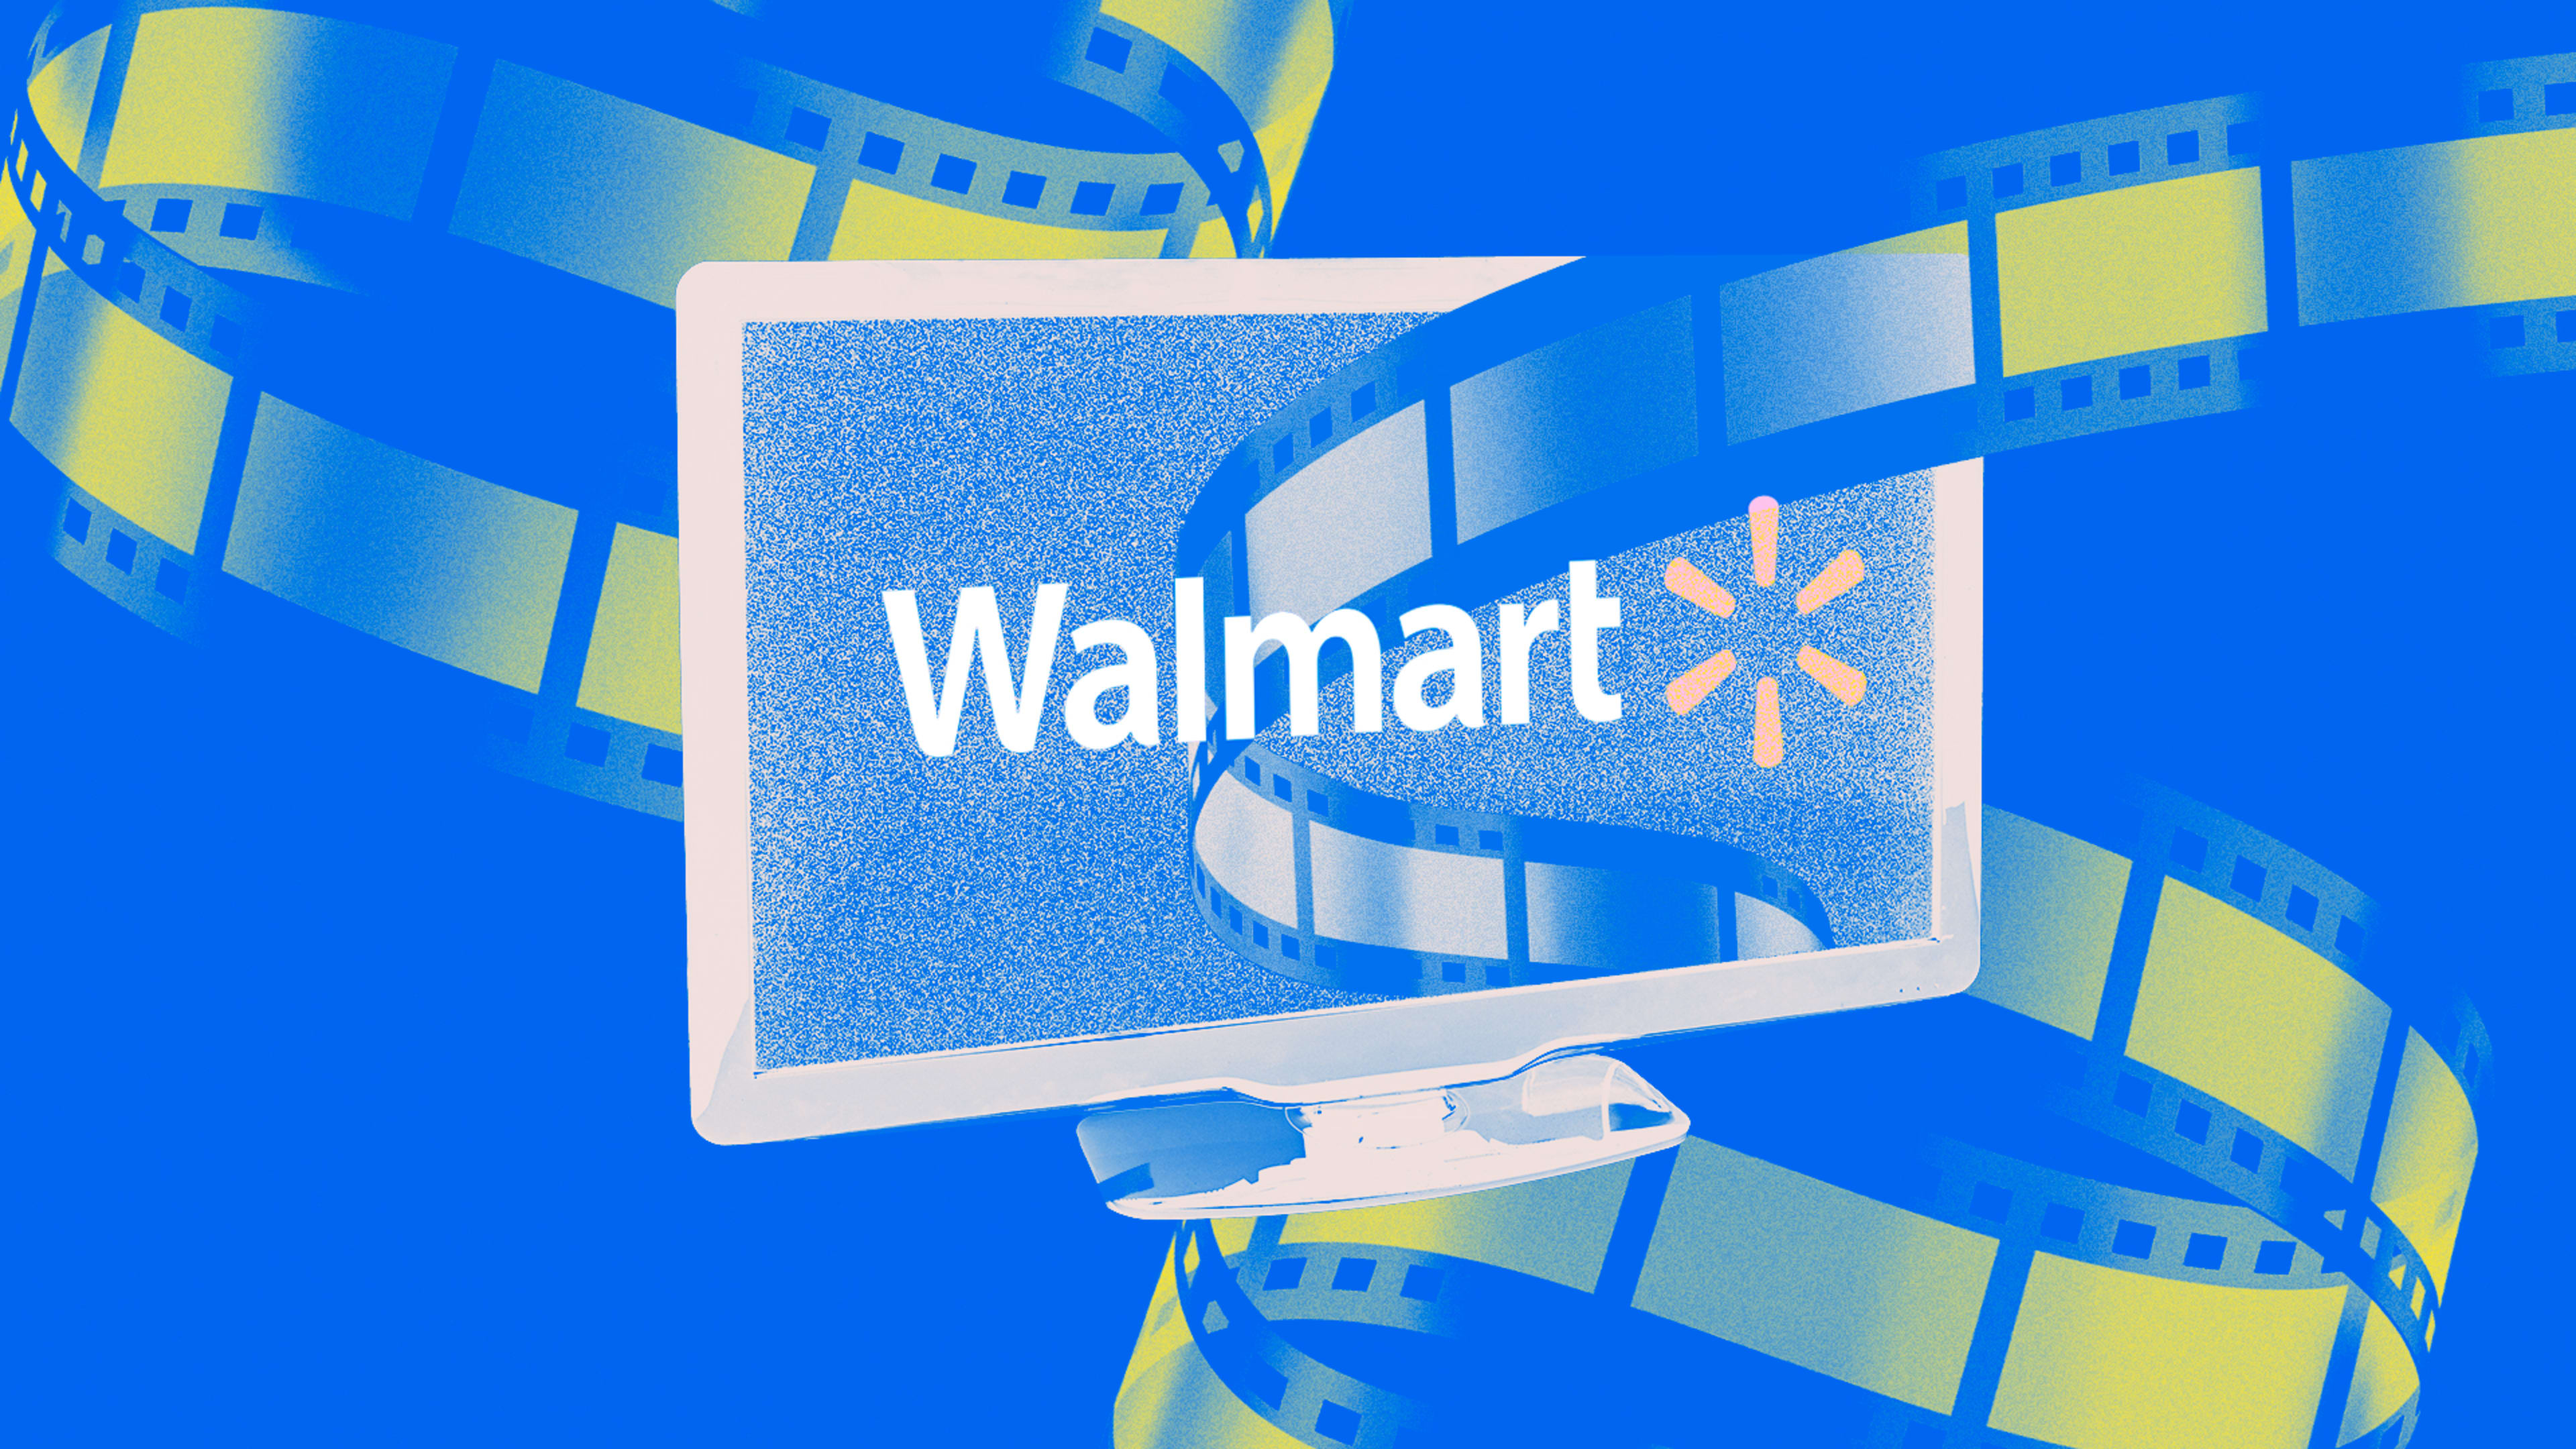 A look back at Walmart’s seemingly doomed 20-year quest to break into Hollywood